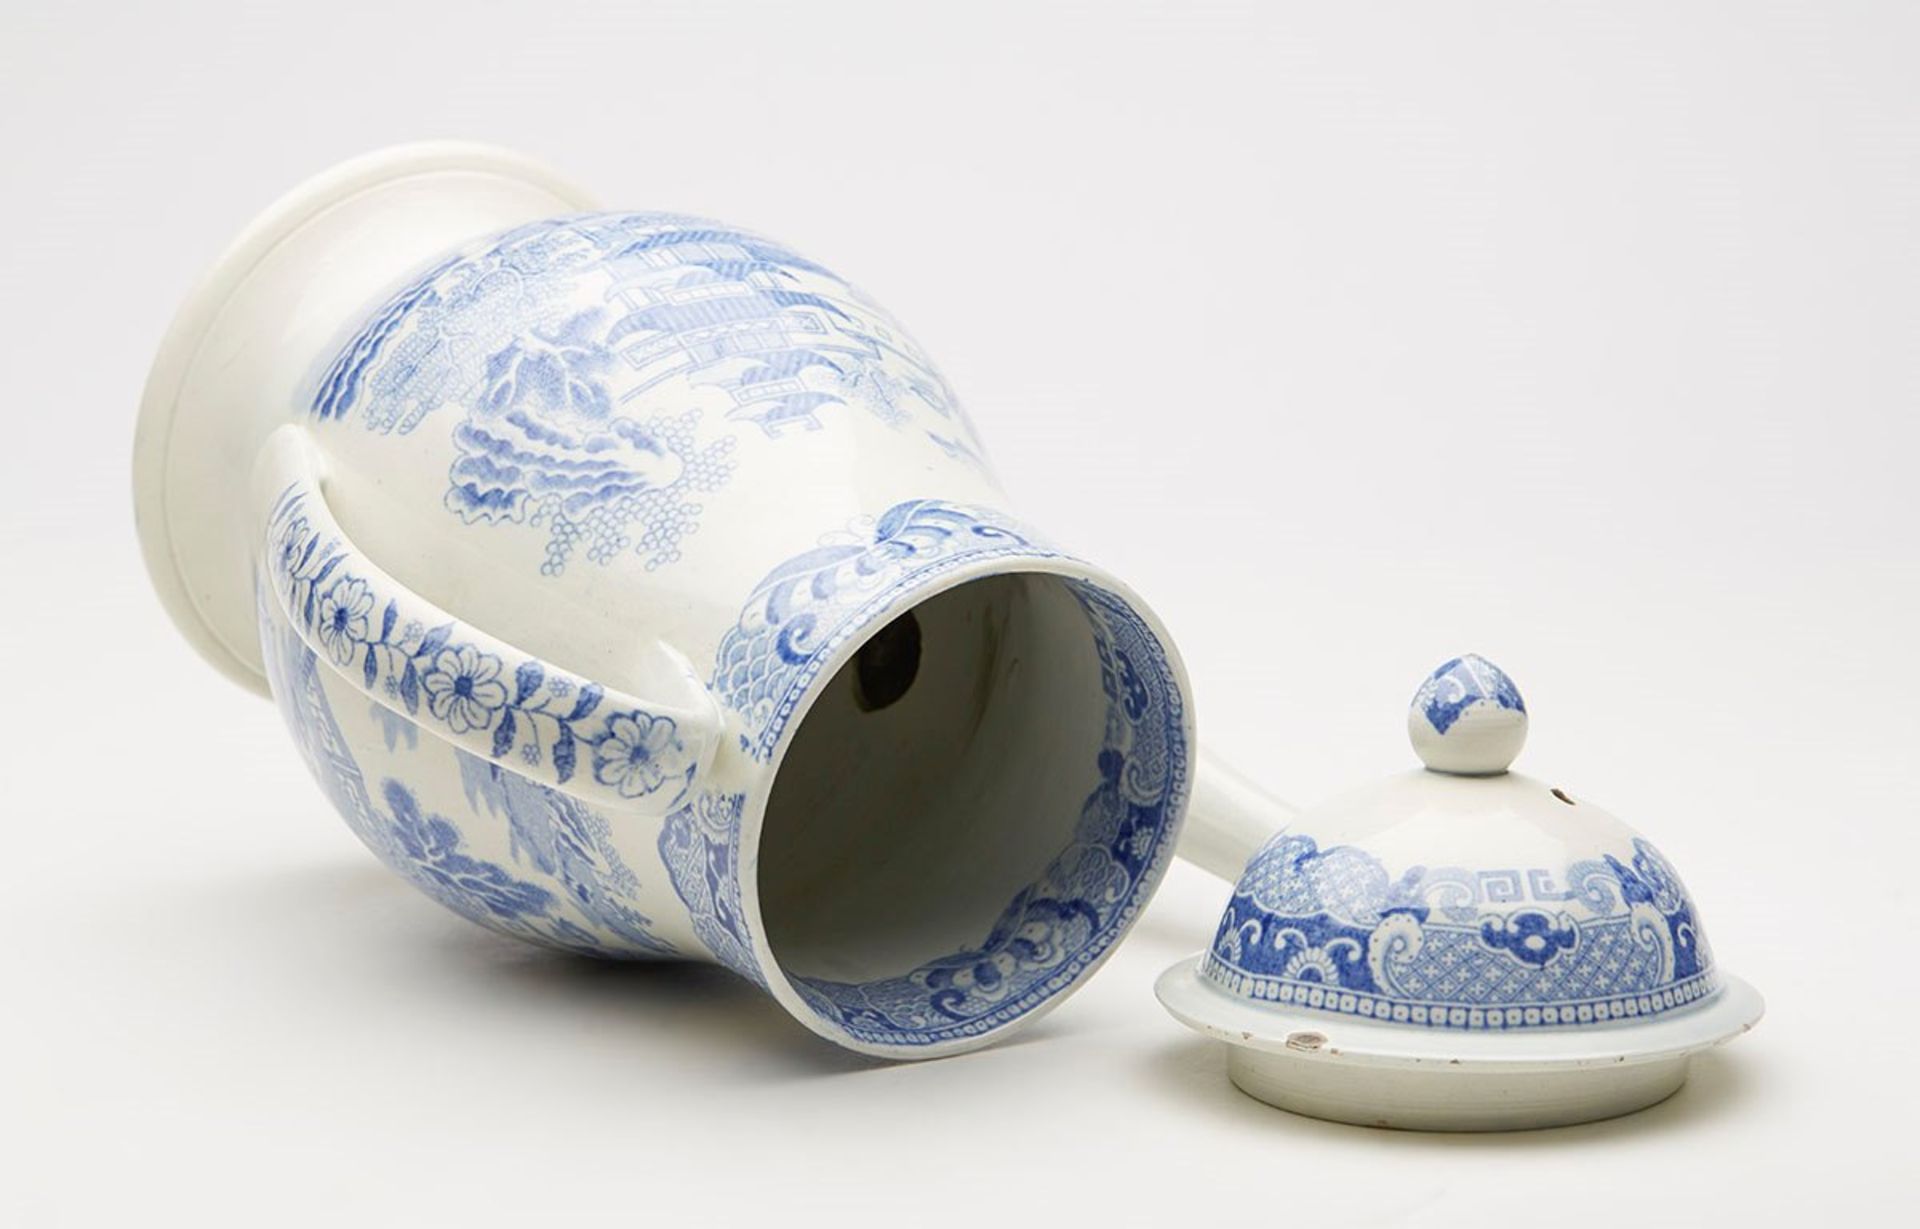 ANTIQUE ENGLISH CHINOISERIE BLUE & WHITE TEAPOT 19TH C.   DIMENSIONS   Height 27cm, Width 23,5cm - Image 10 of 10